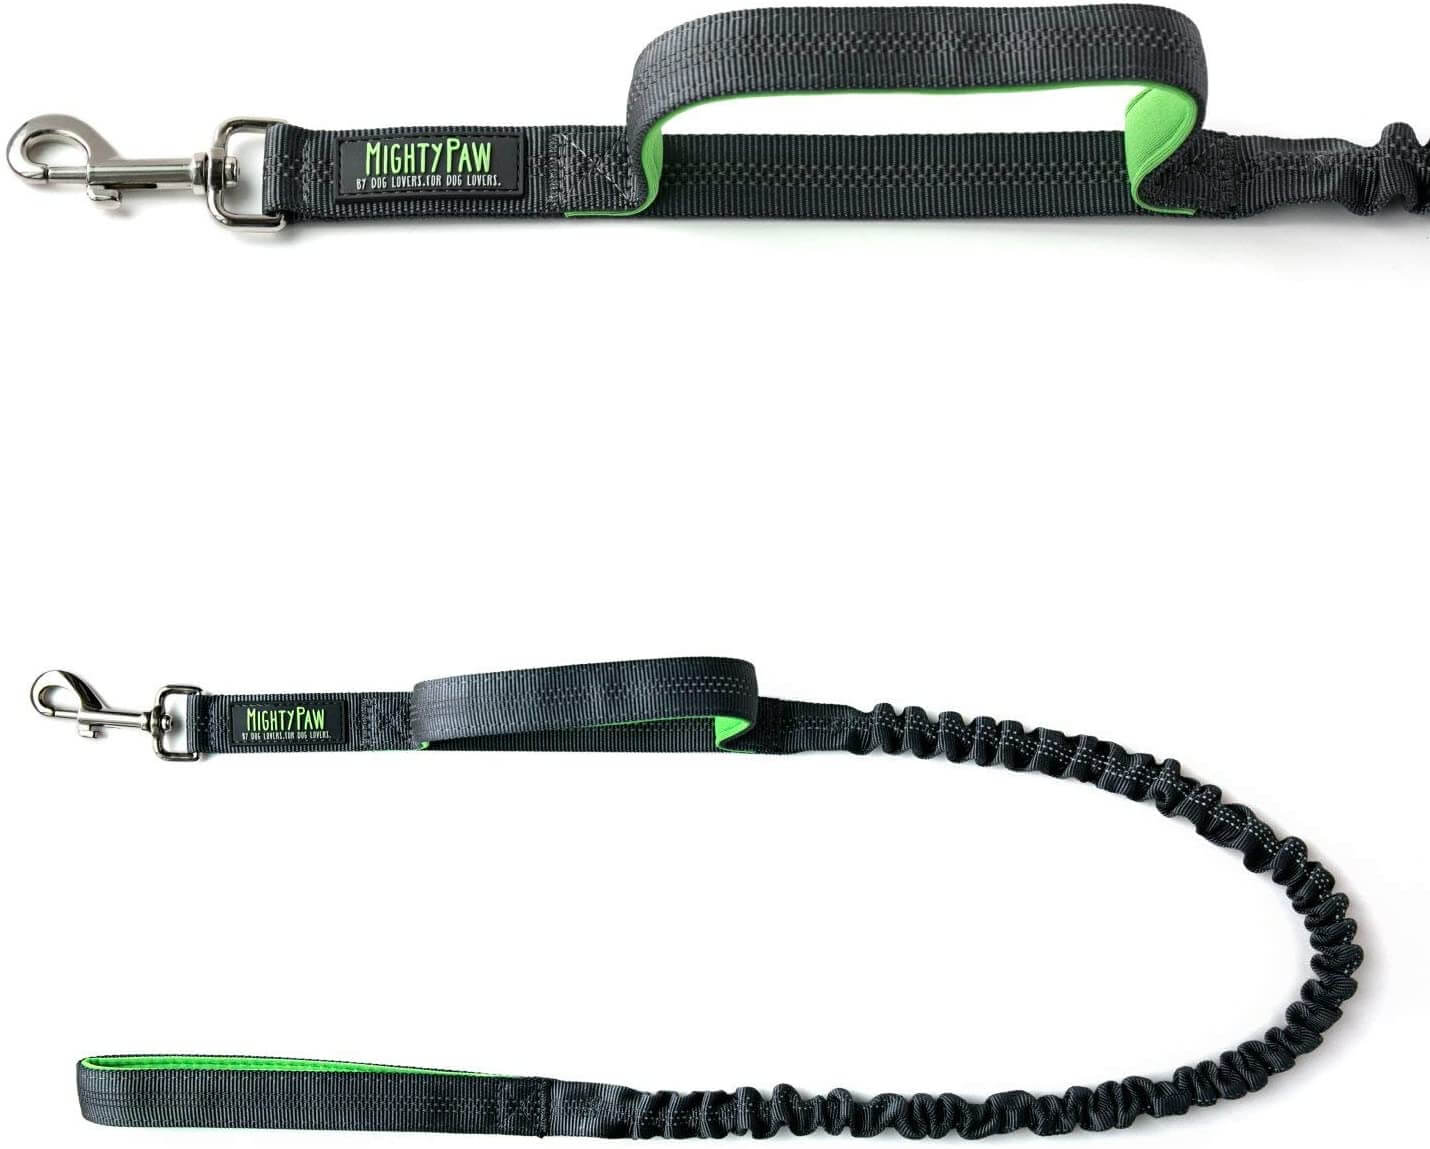 Mighty Paw Dual Handle Bungee Leash with Shock-Absorbing System